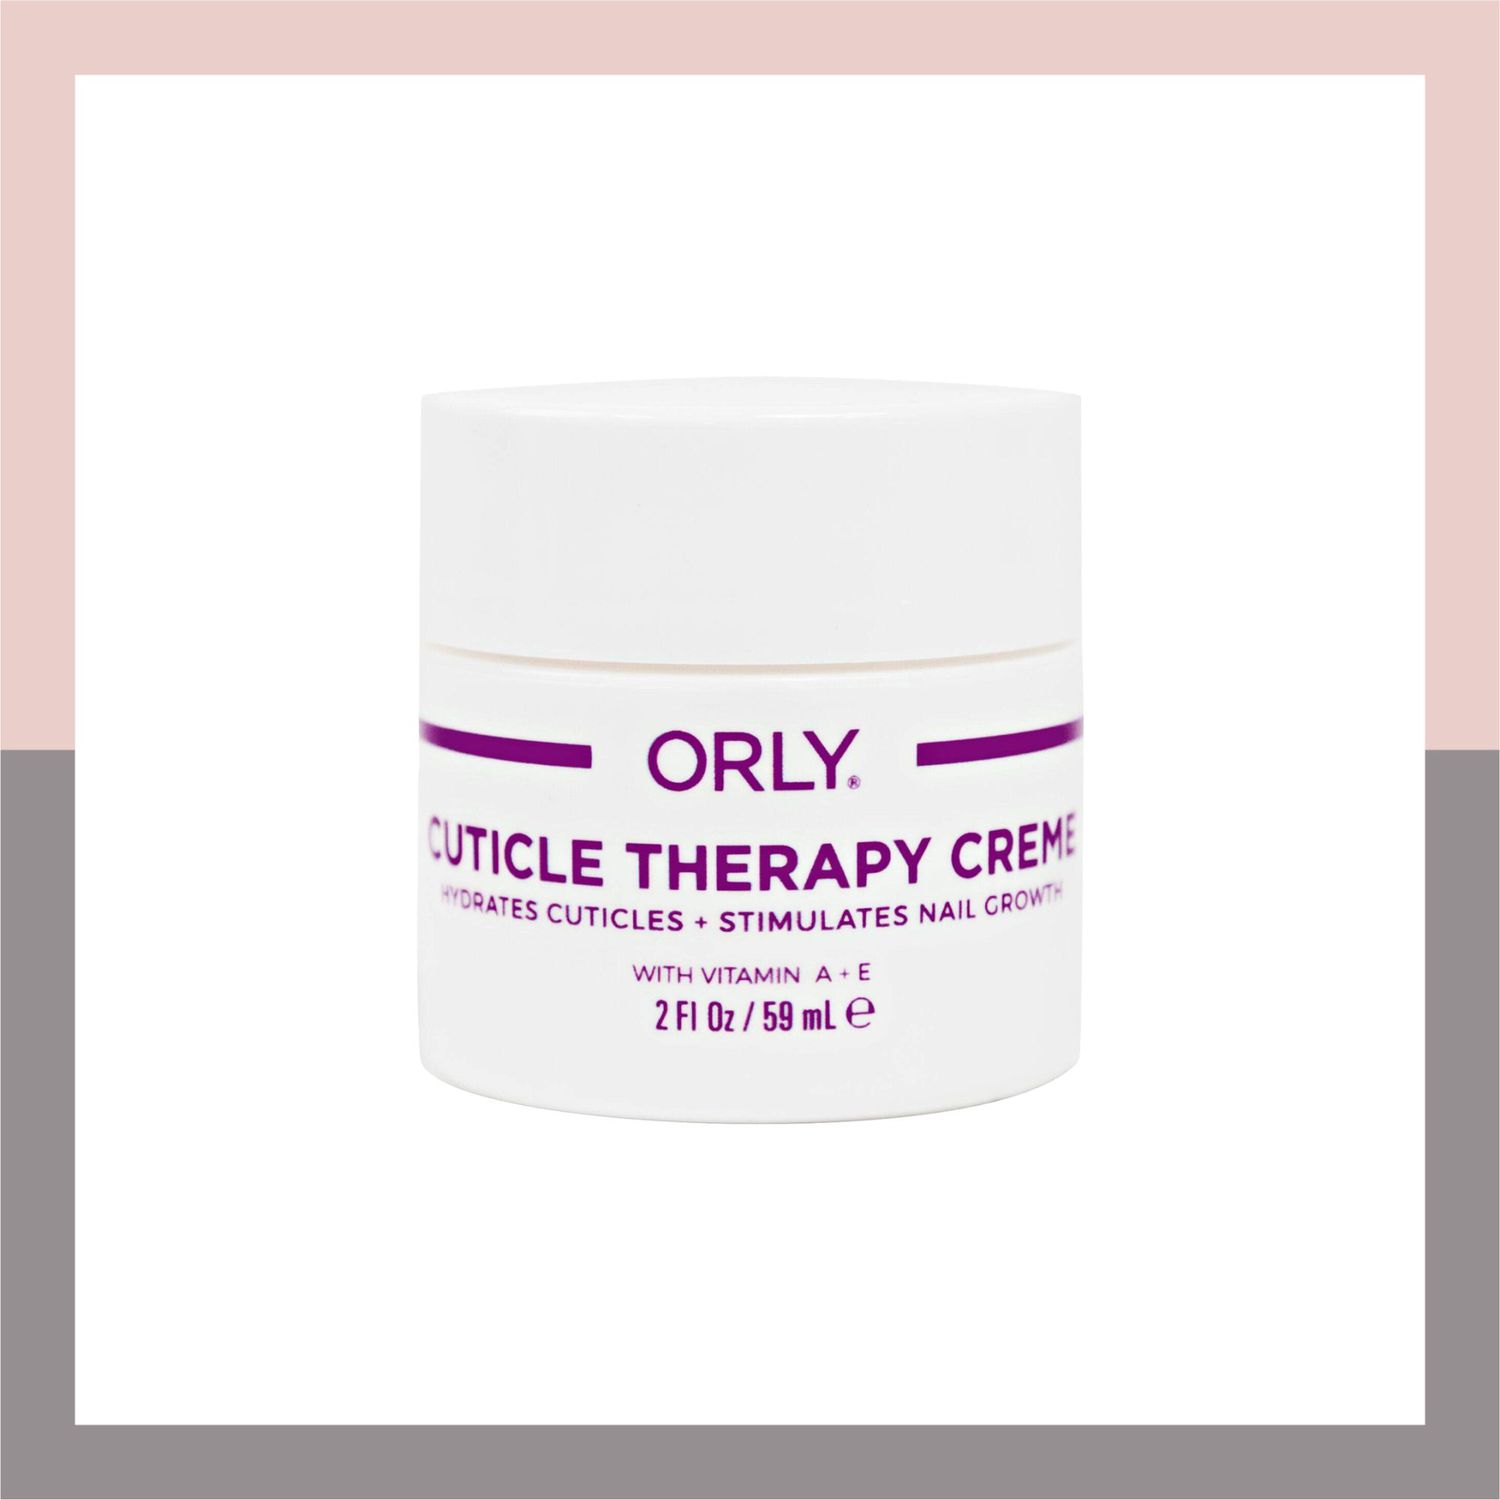 ORLY Cuticle Therapy Cream